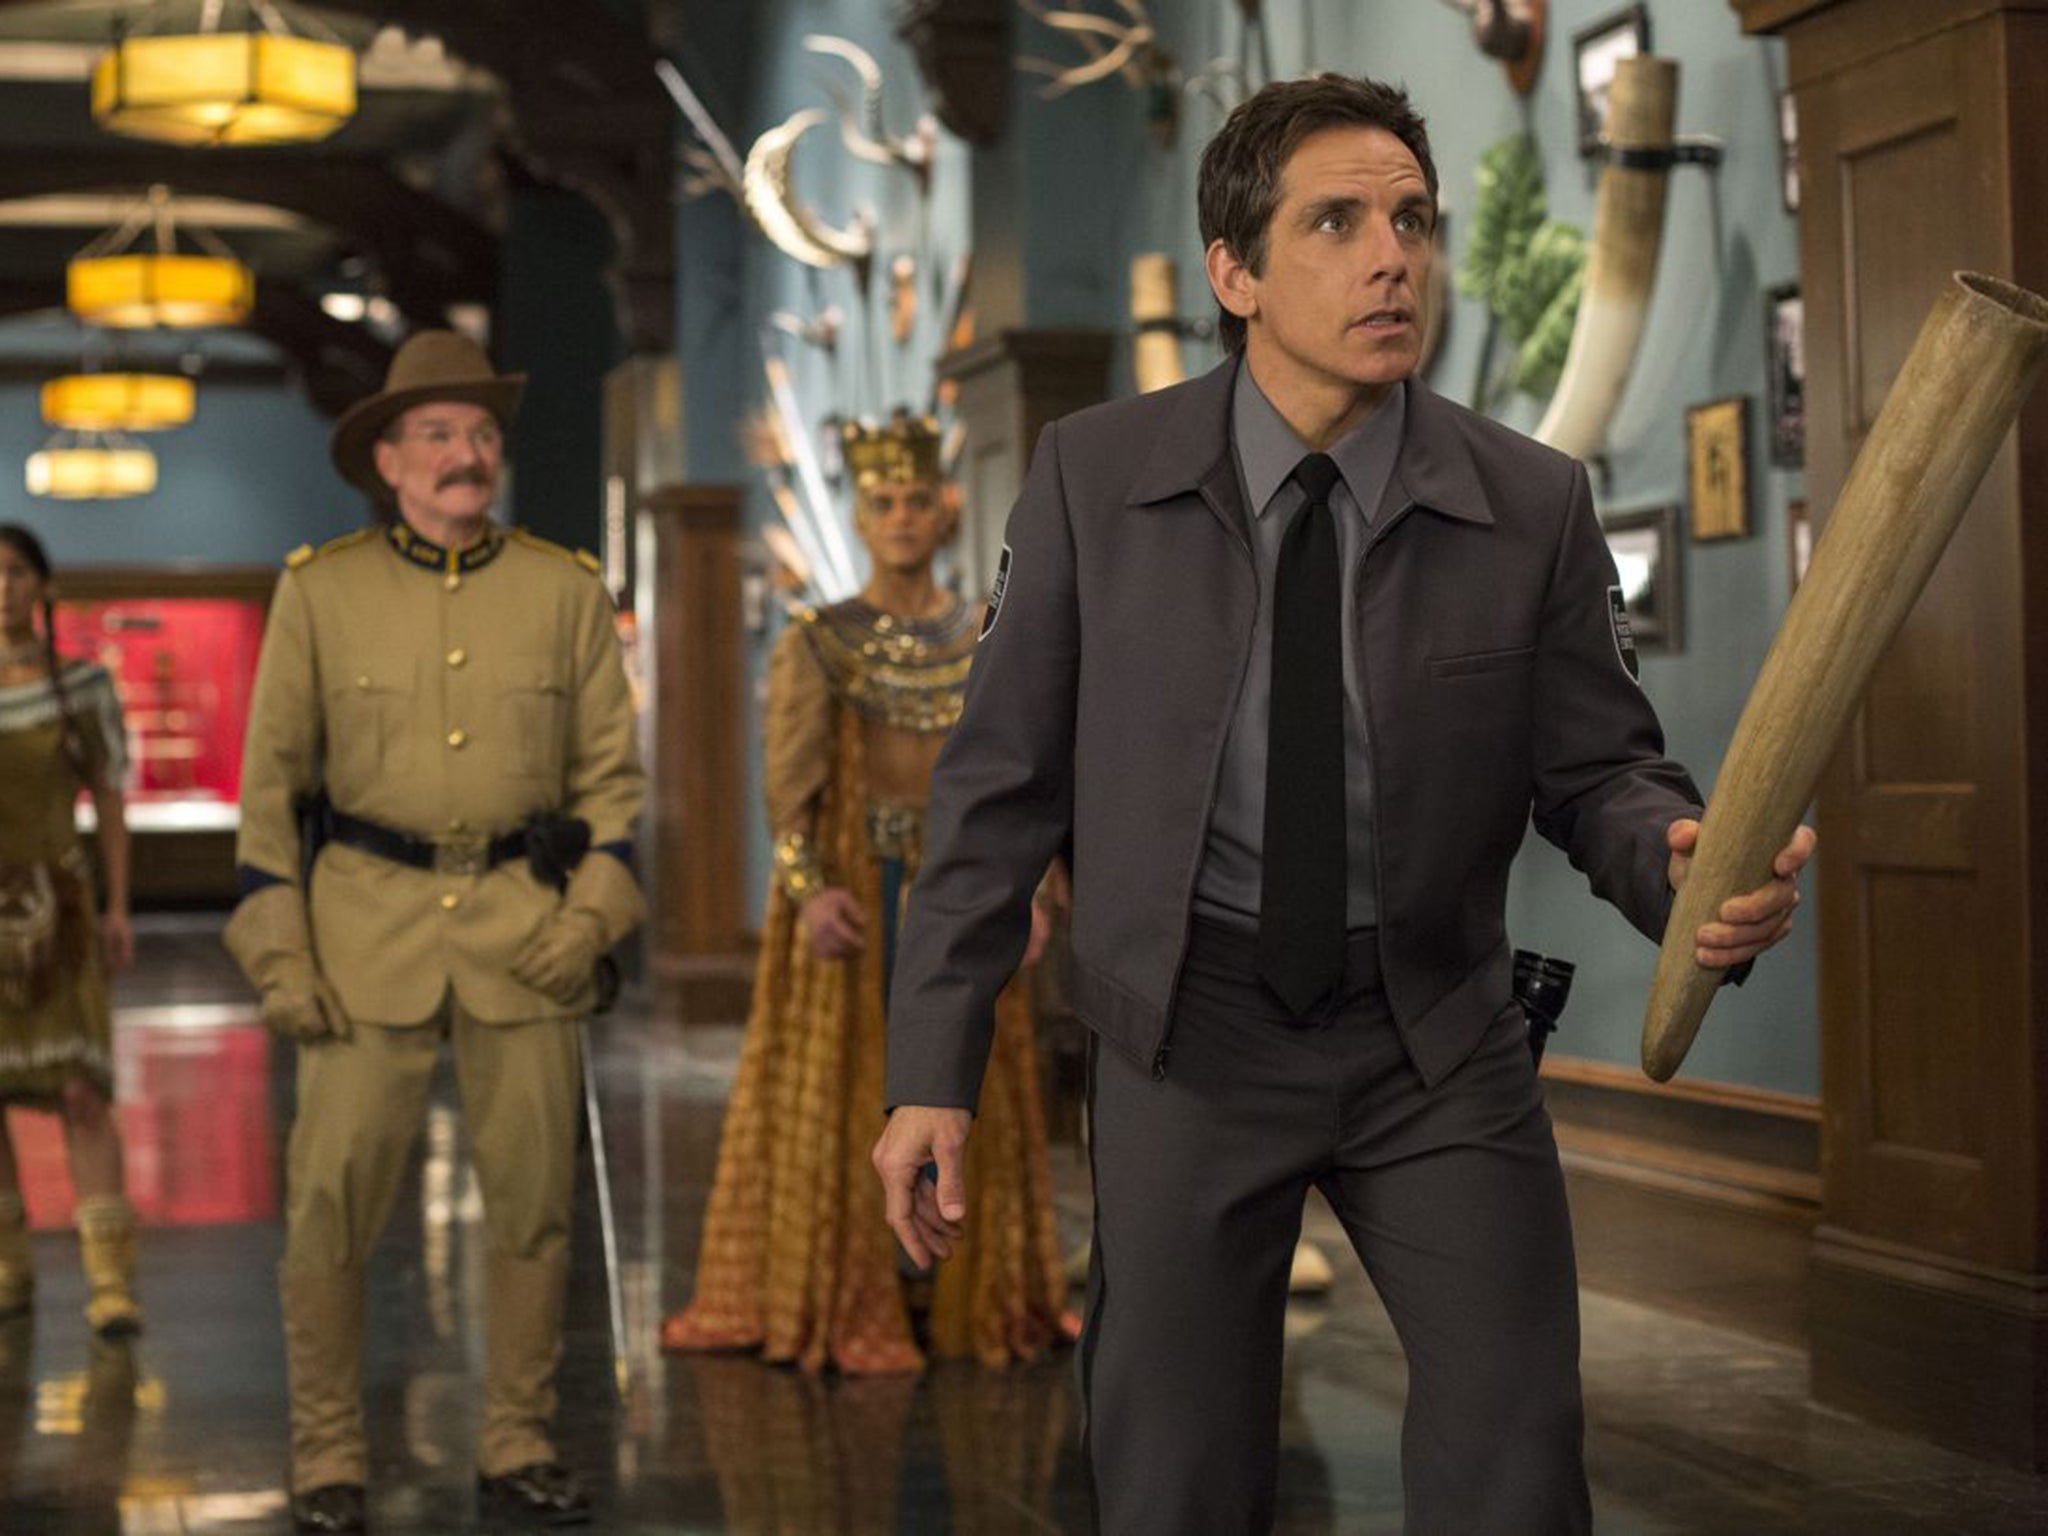 Ben Stiller with Robin Williams in ‘Night at the Museum: Secret of the Tomb’